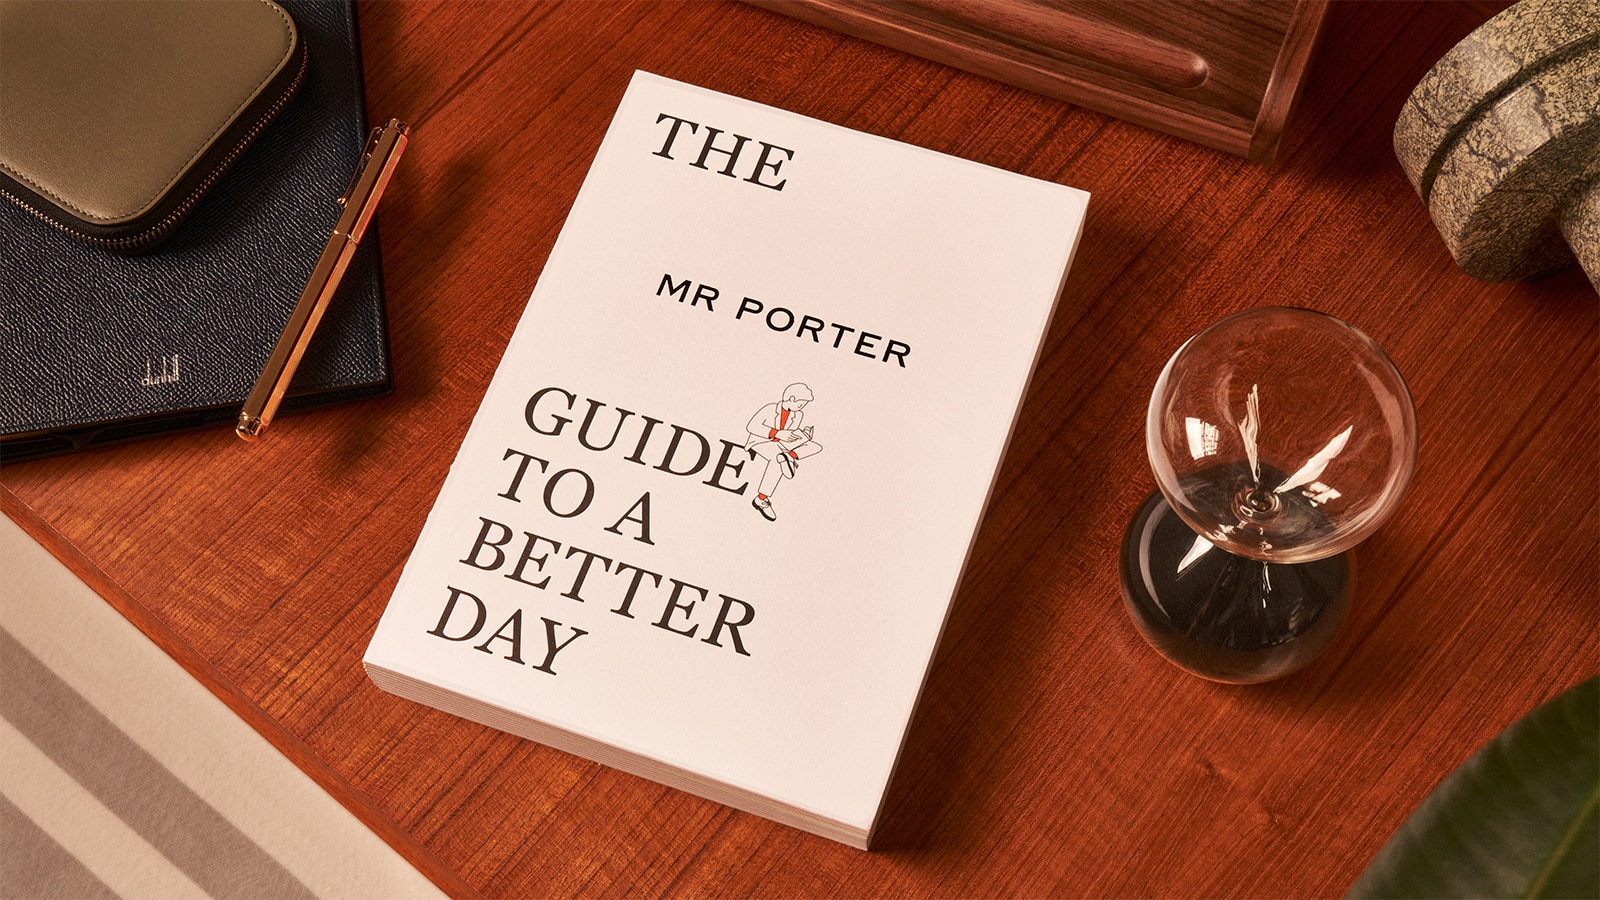 The MR PORTER Guide To A Better Day: 41 ...